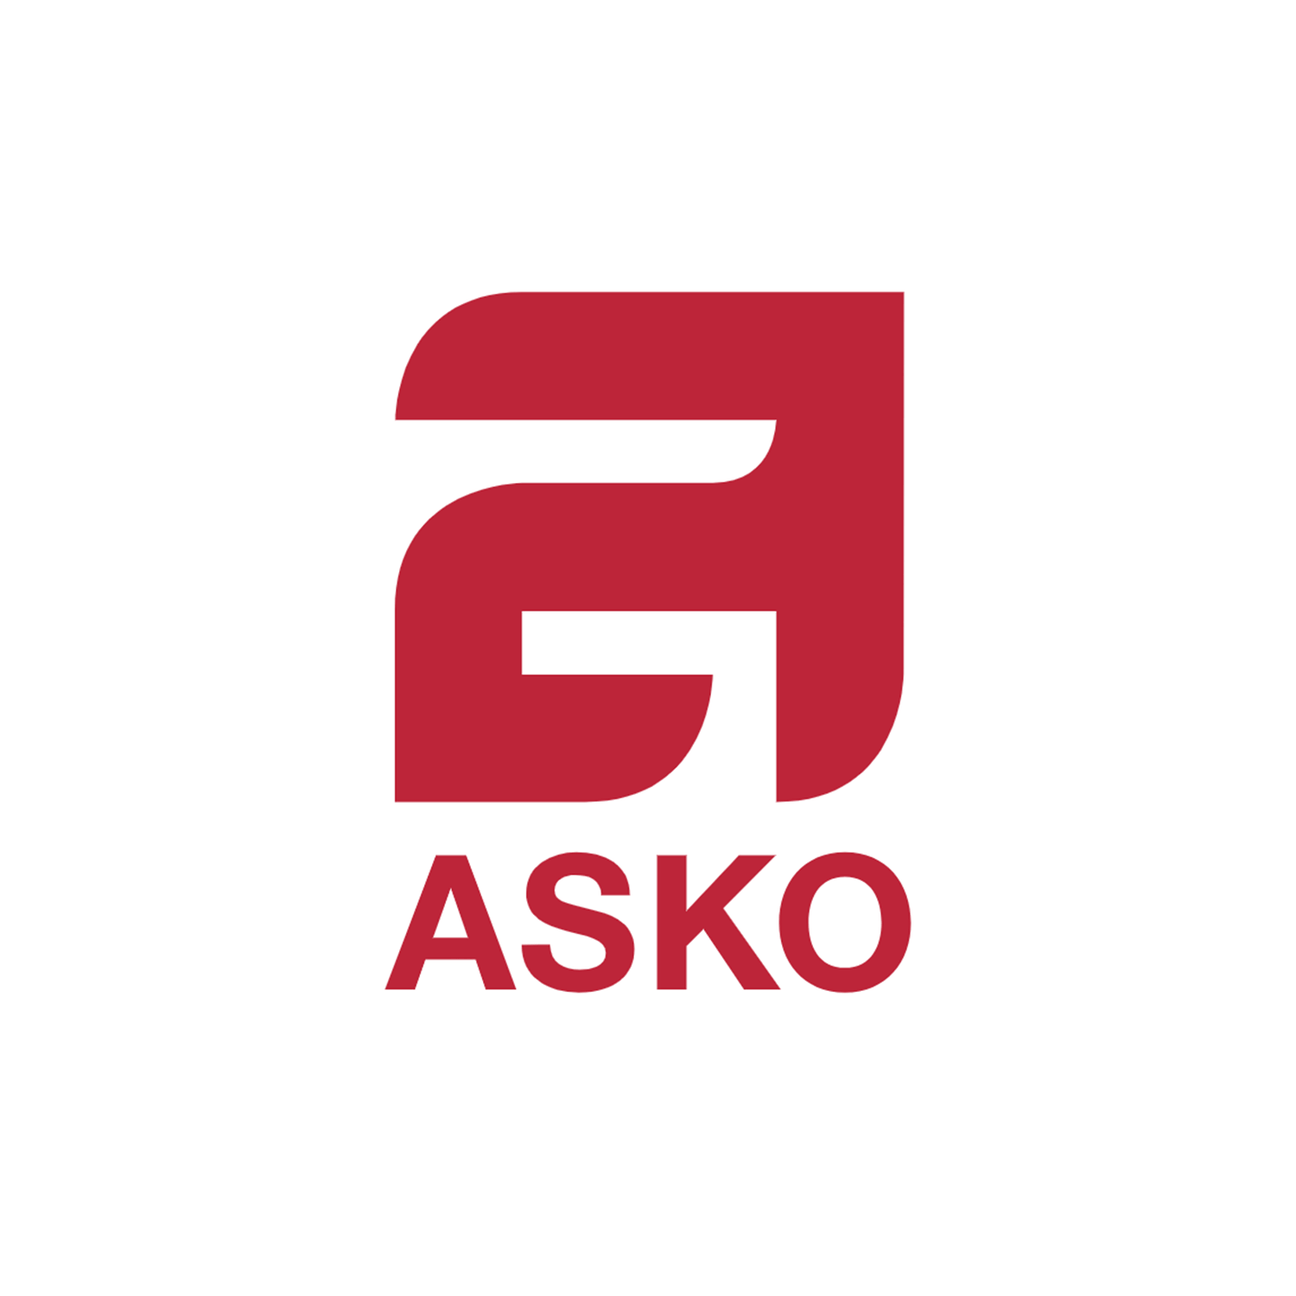 Asko - My Oven Spares